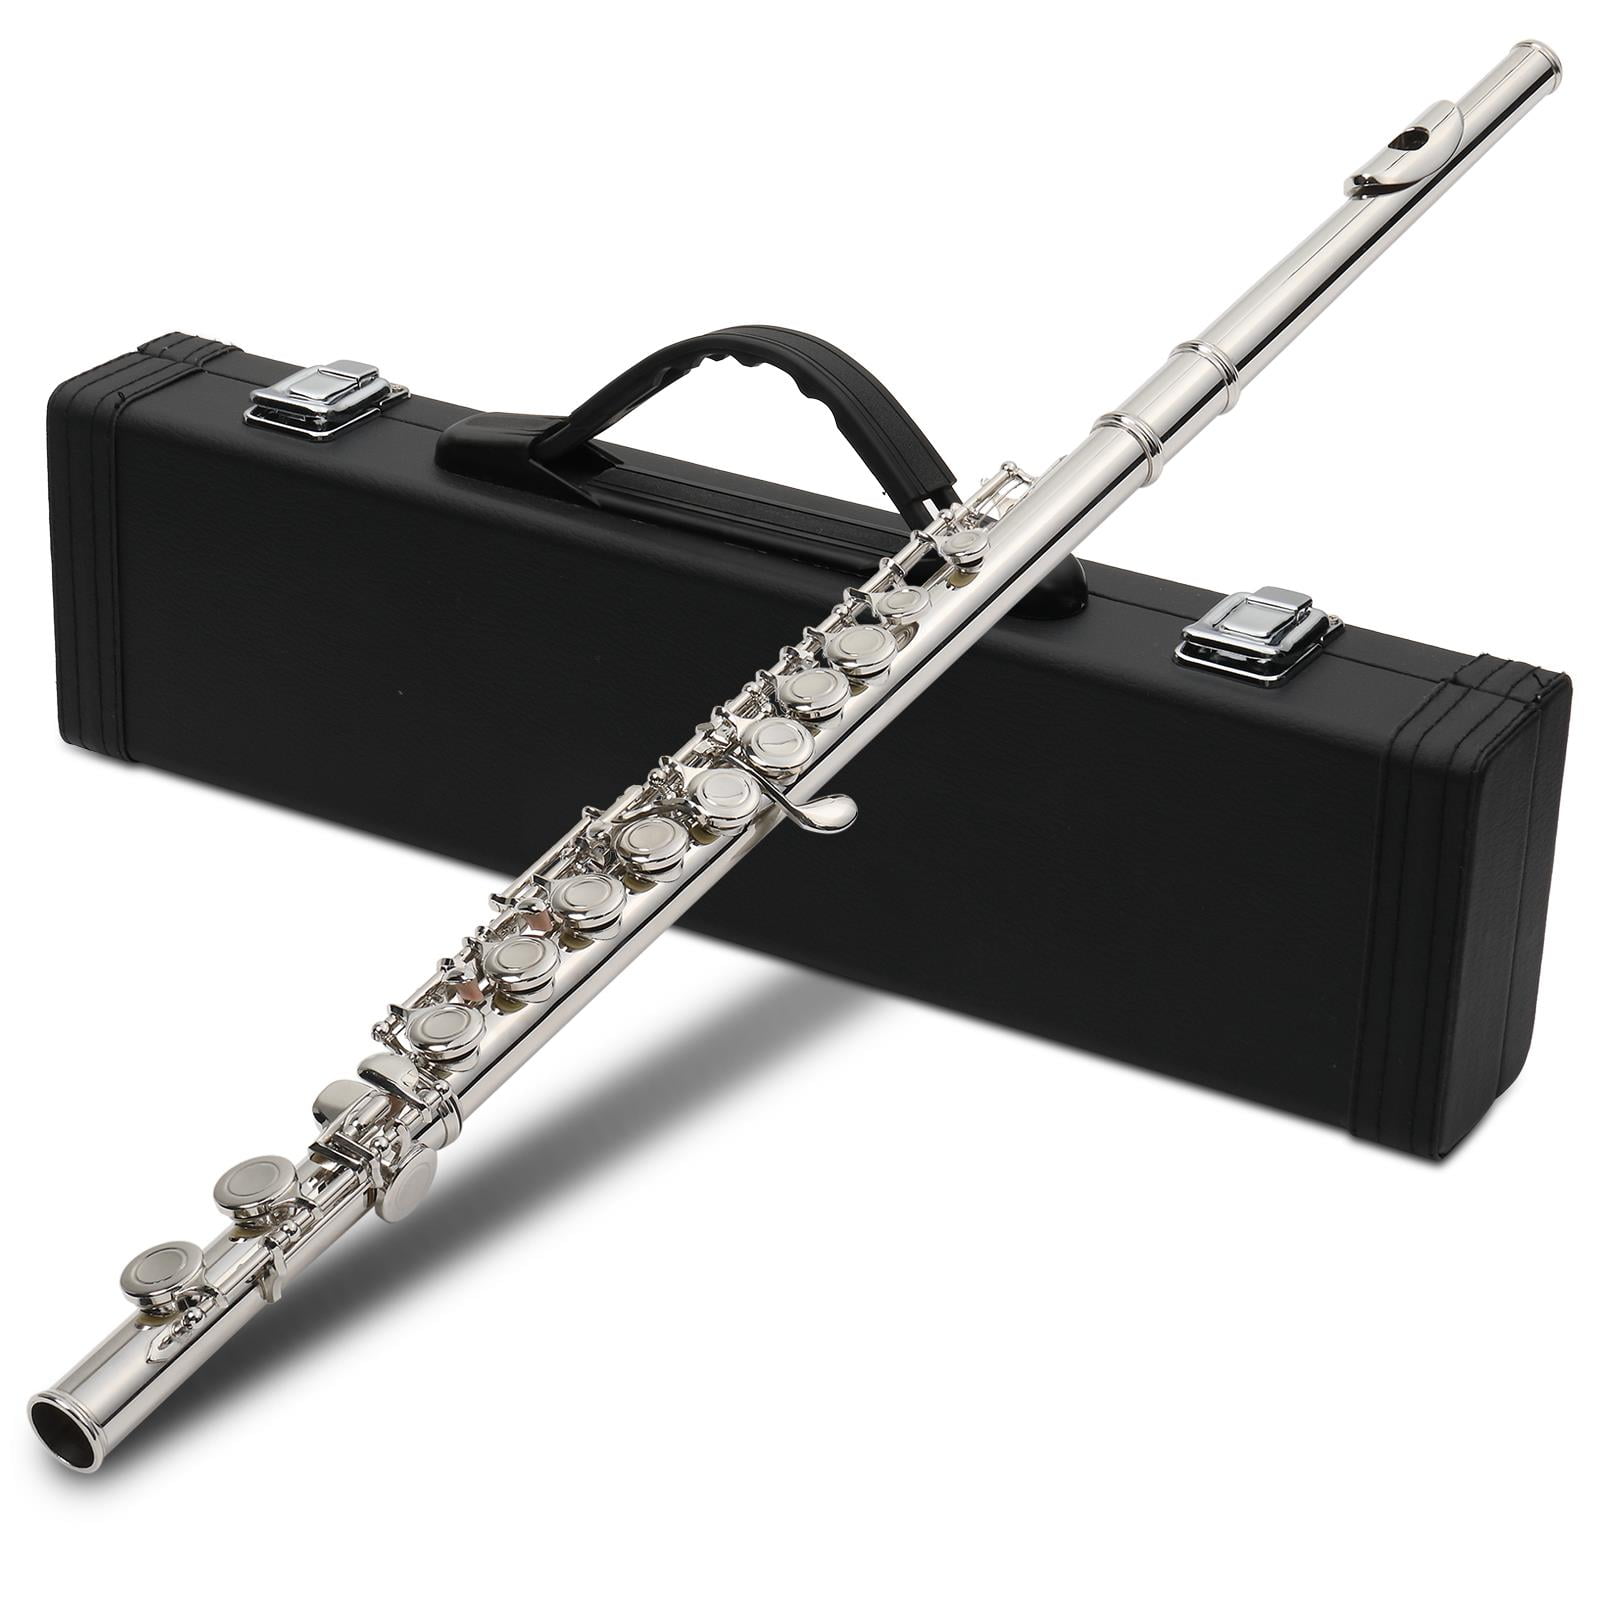 Muslady Western Concert Flute Silver Plated 16 Holes C Key 